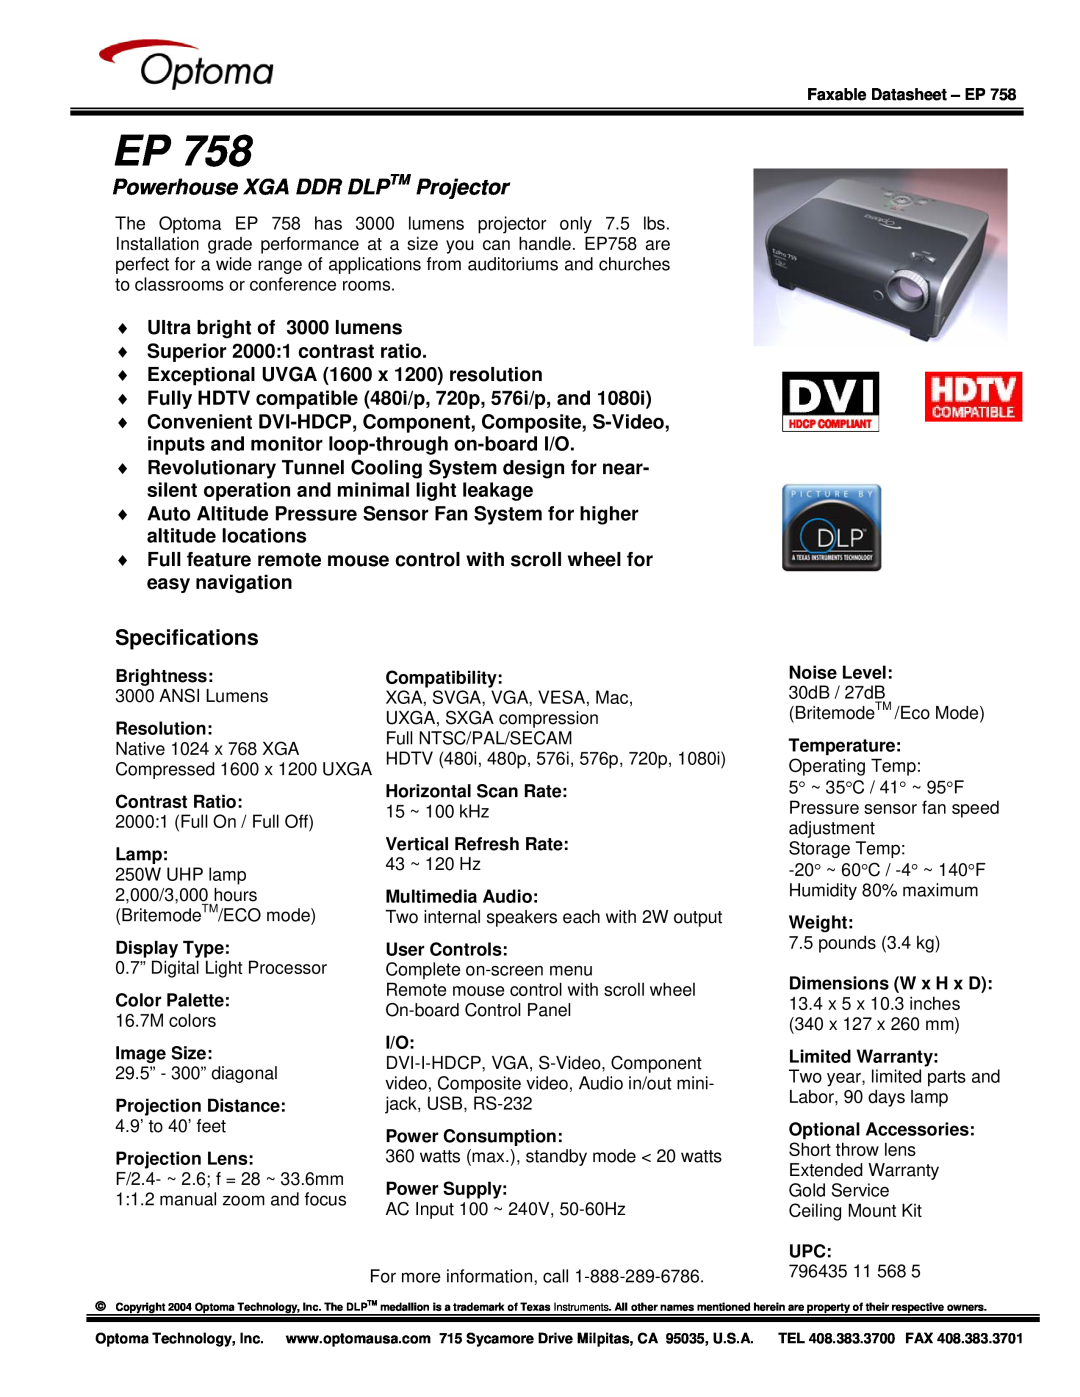 Optoma Technology EP 758 specifications Powerhouse XGA DDR DLPTM Projector, Specifications 